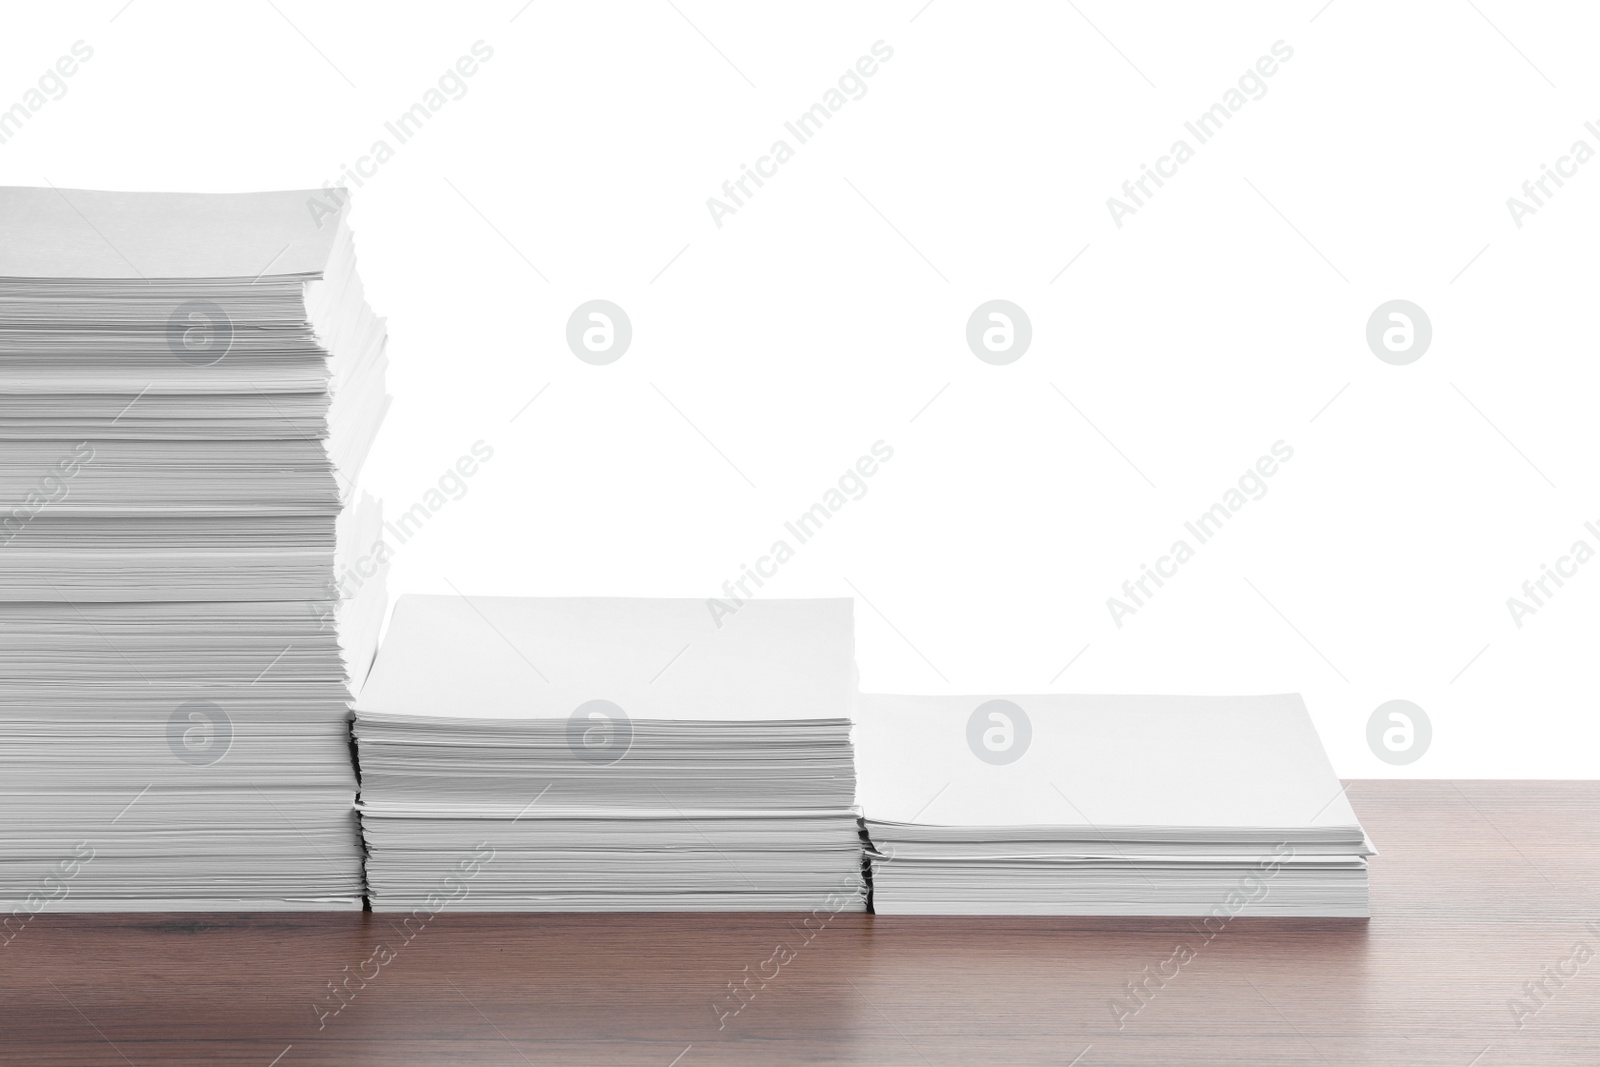 Photo of Stacks of paper sheets on wooden table against white background